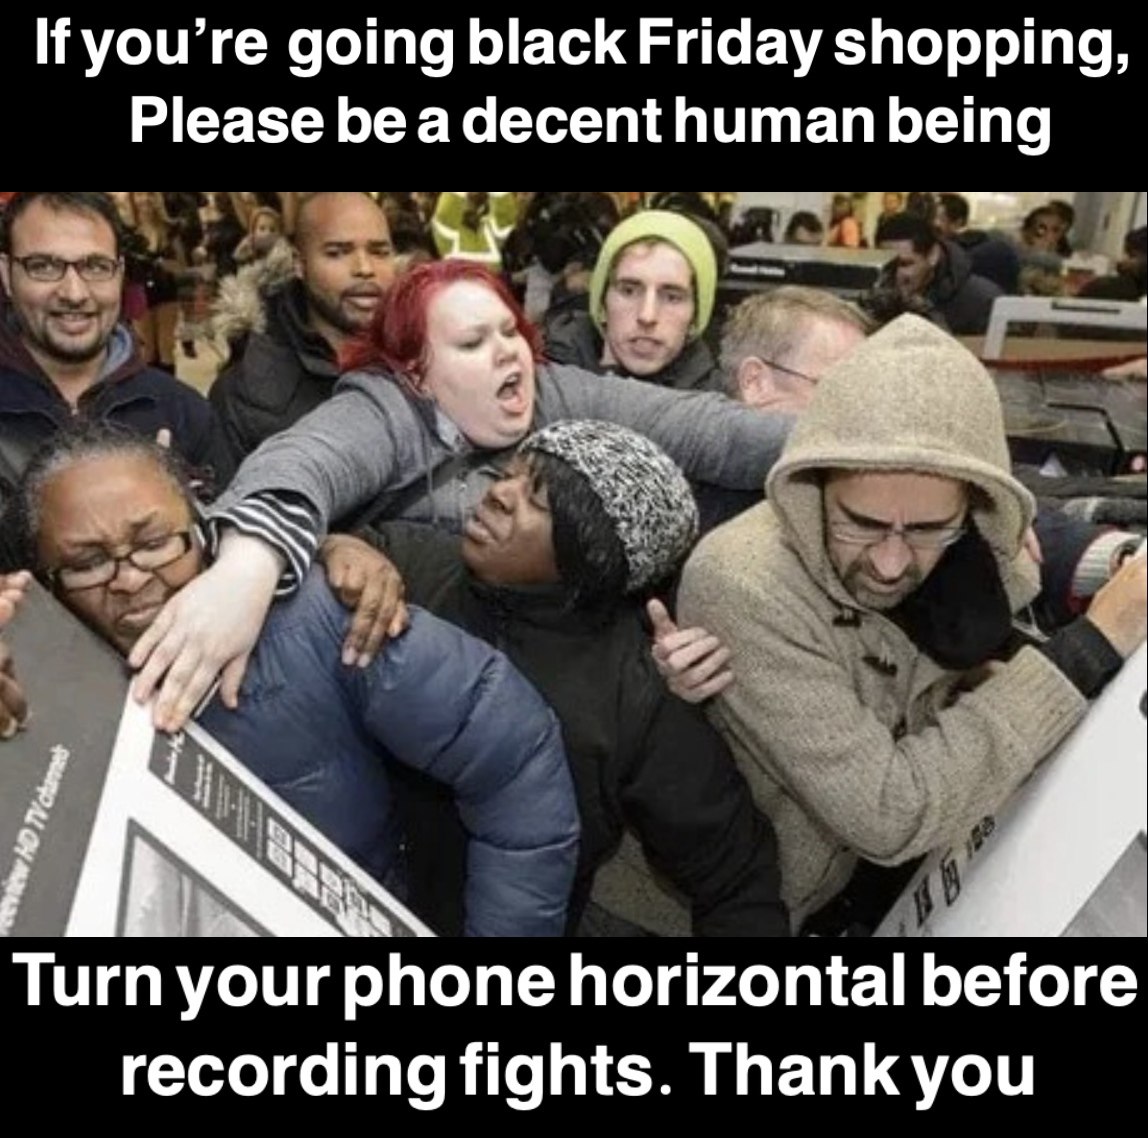 funny memes - inside walmart black friday - If you're going black Friday shopping, Please be a decent human being Vid Tv channel Turn your phone horizontal before recording fights. Thank you